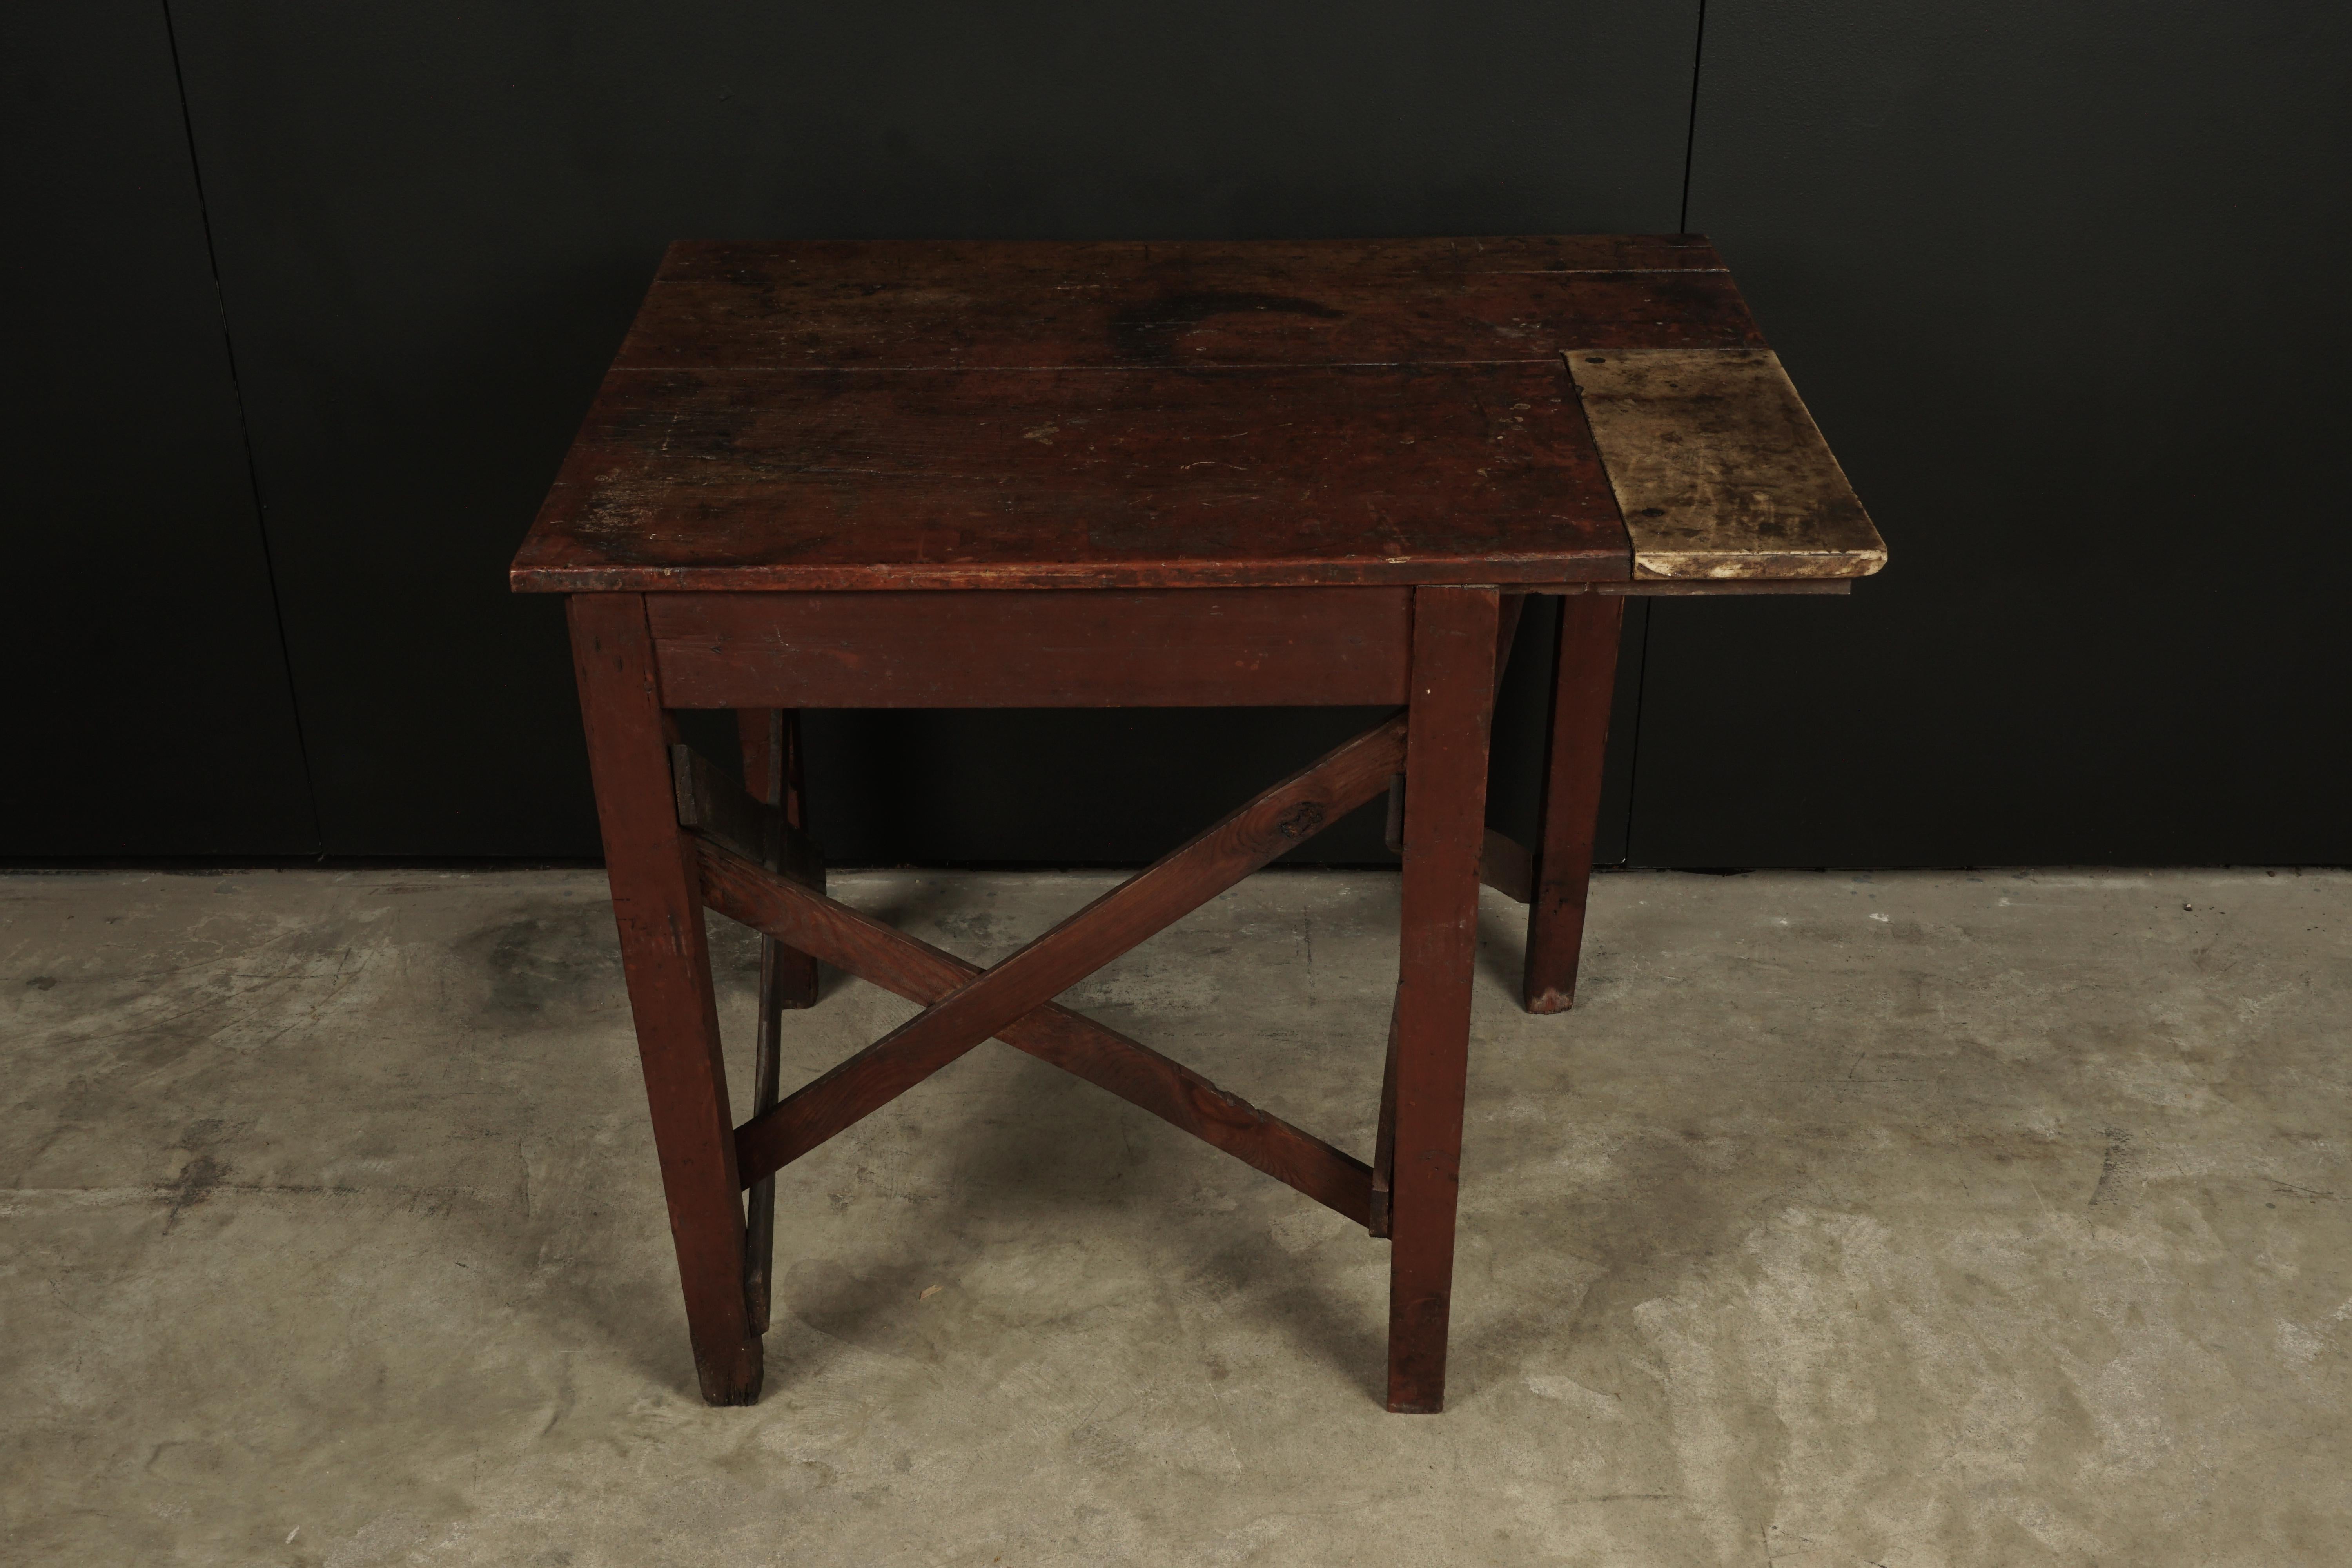 Early work table from a leather factory, France, 1950s. Nice original patina and wear.